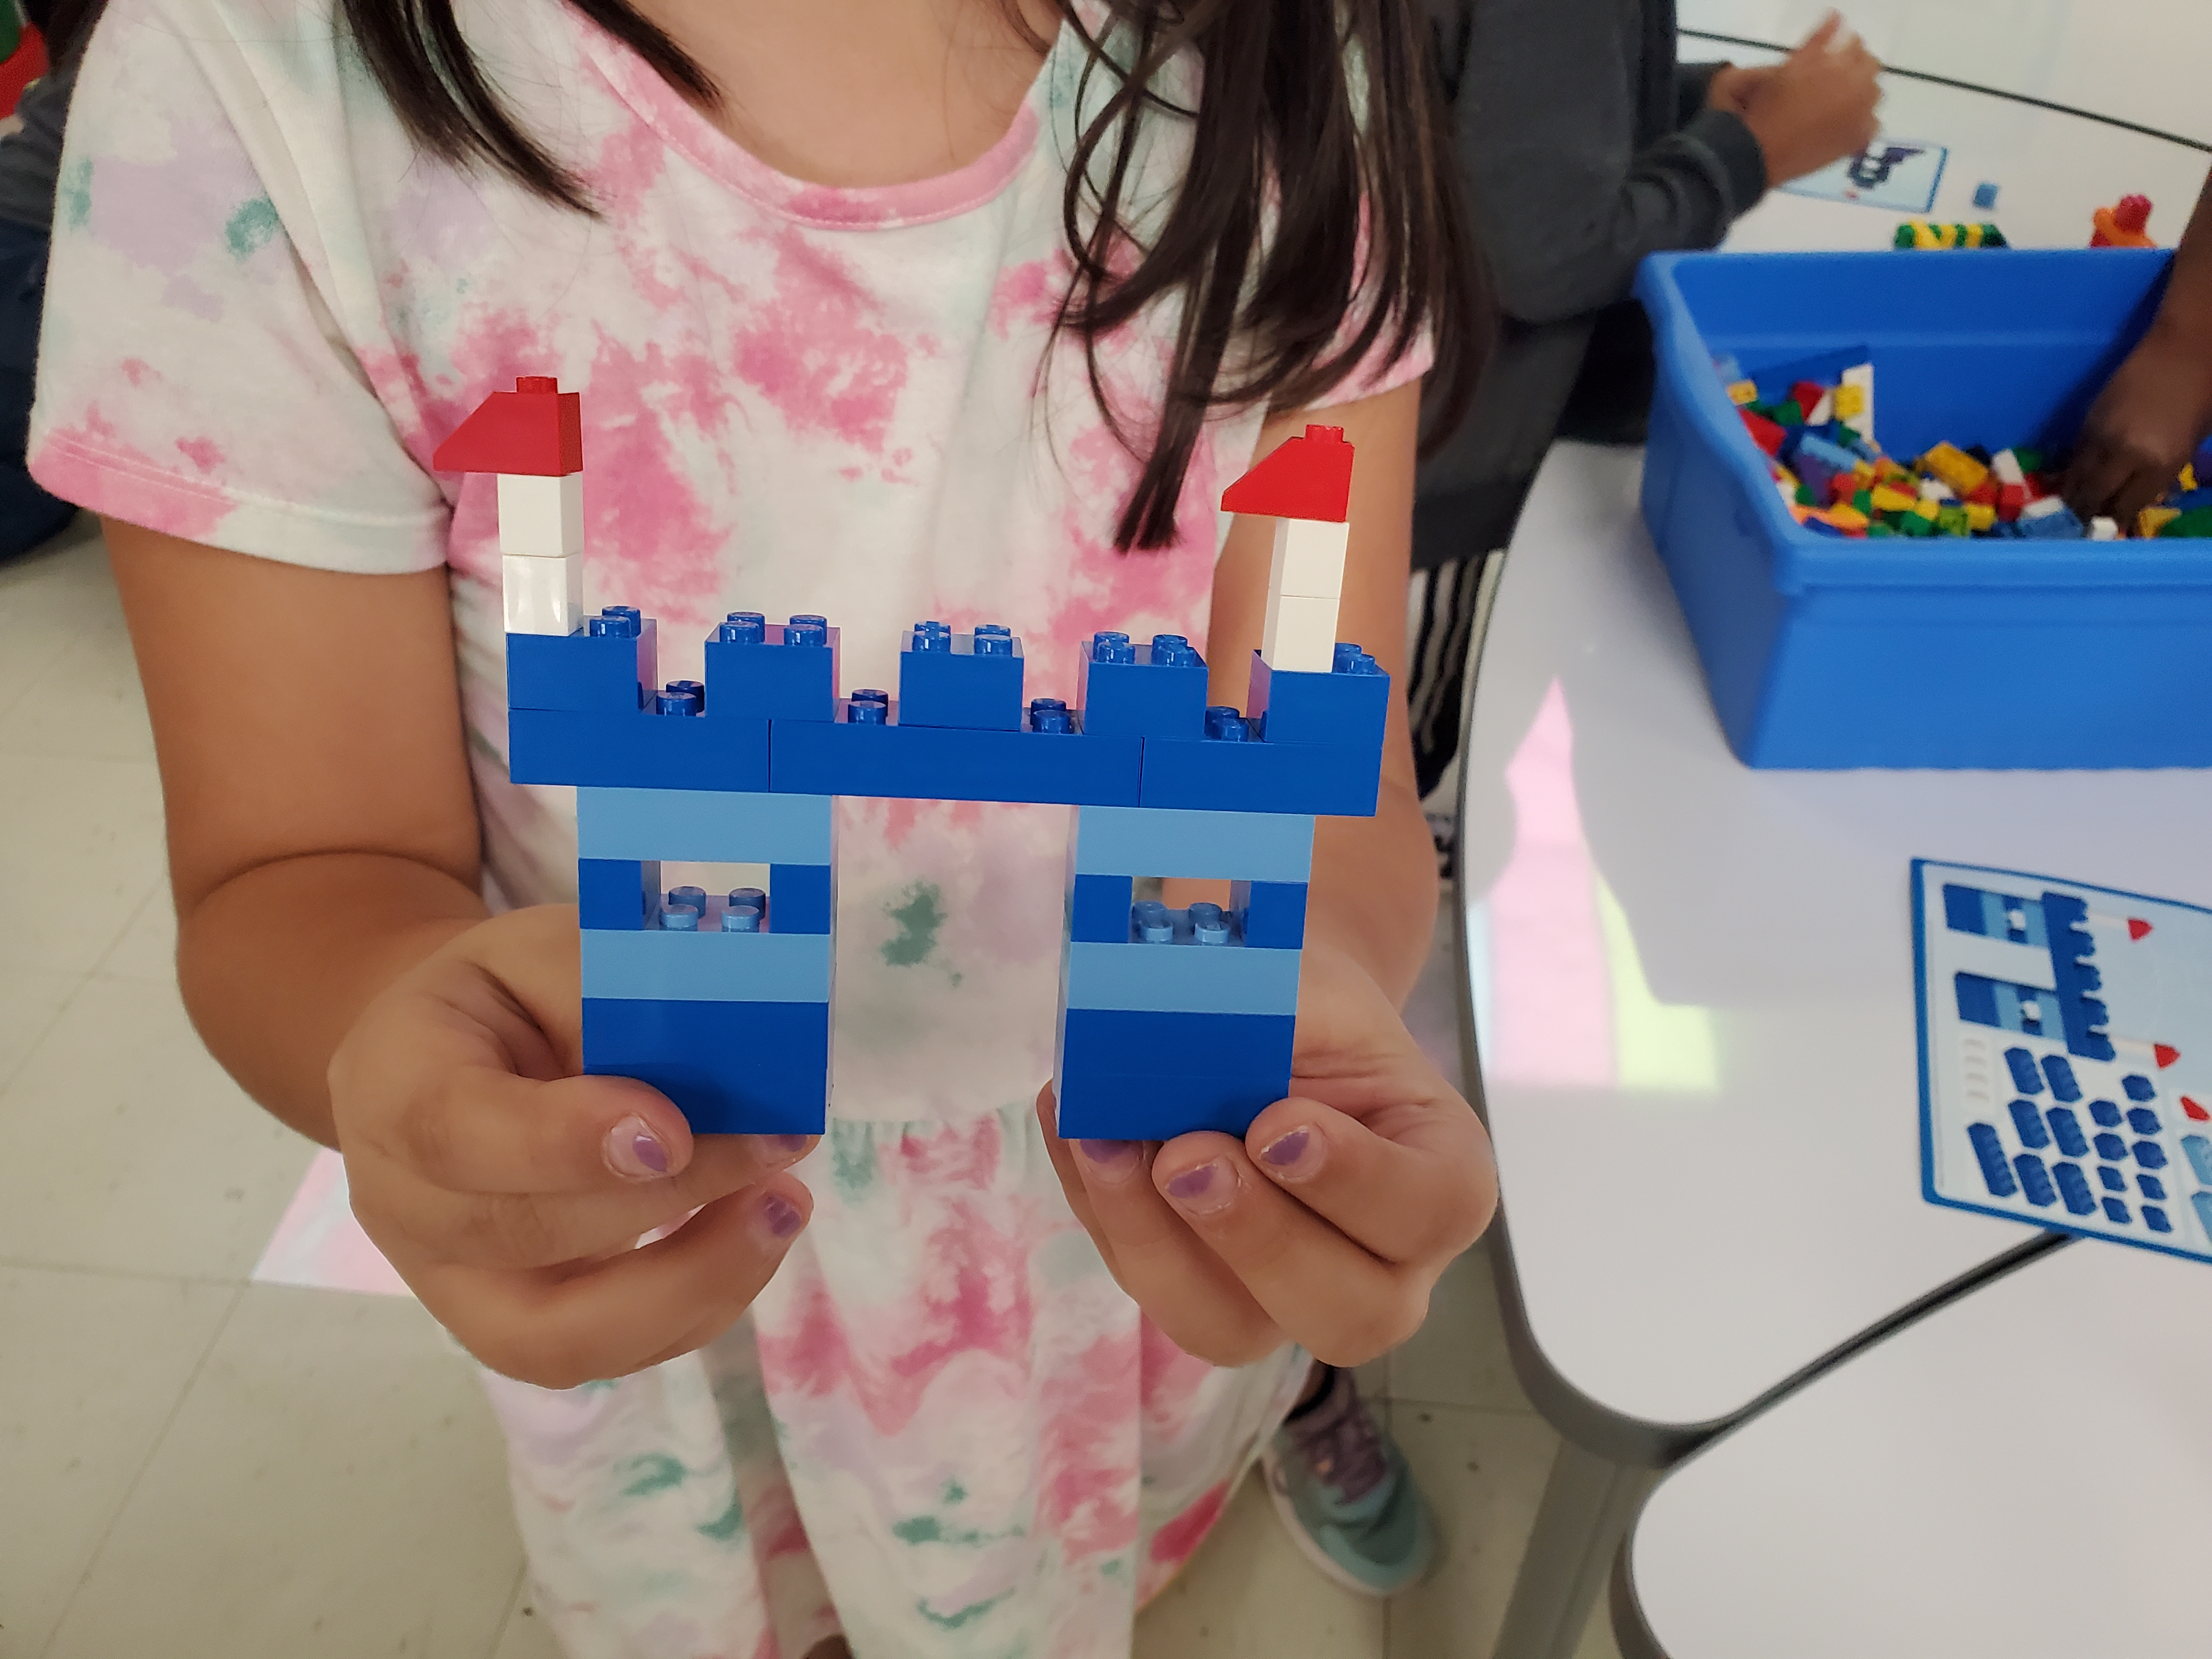 Students building with Legos